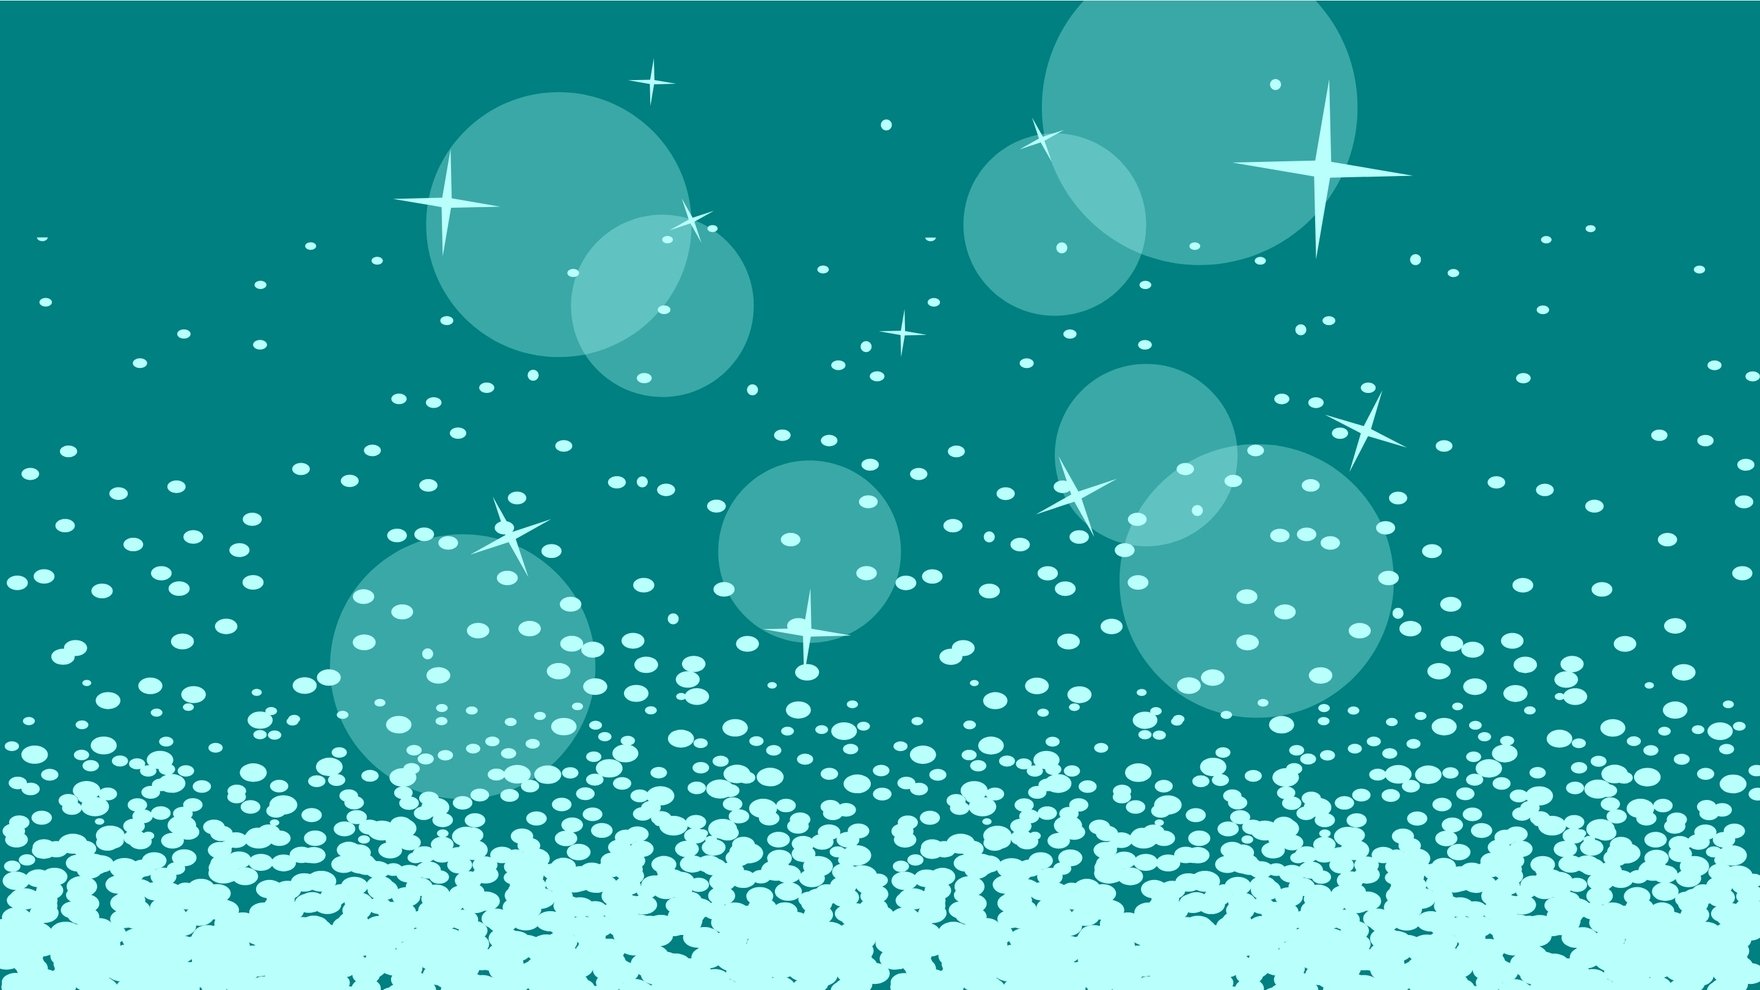 Free Sparkly Teal Background